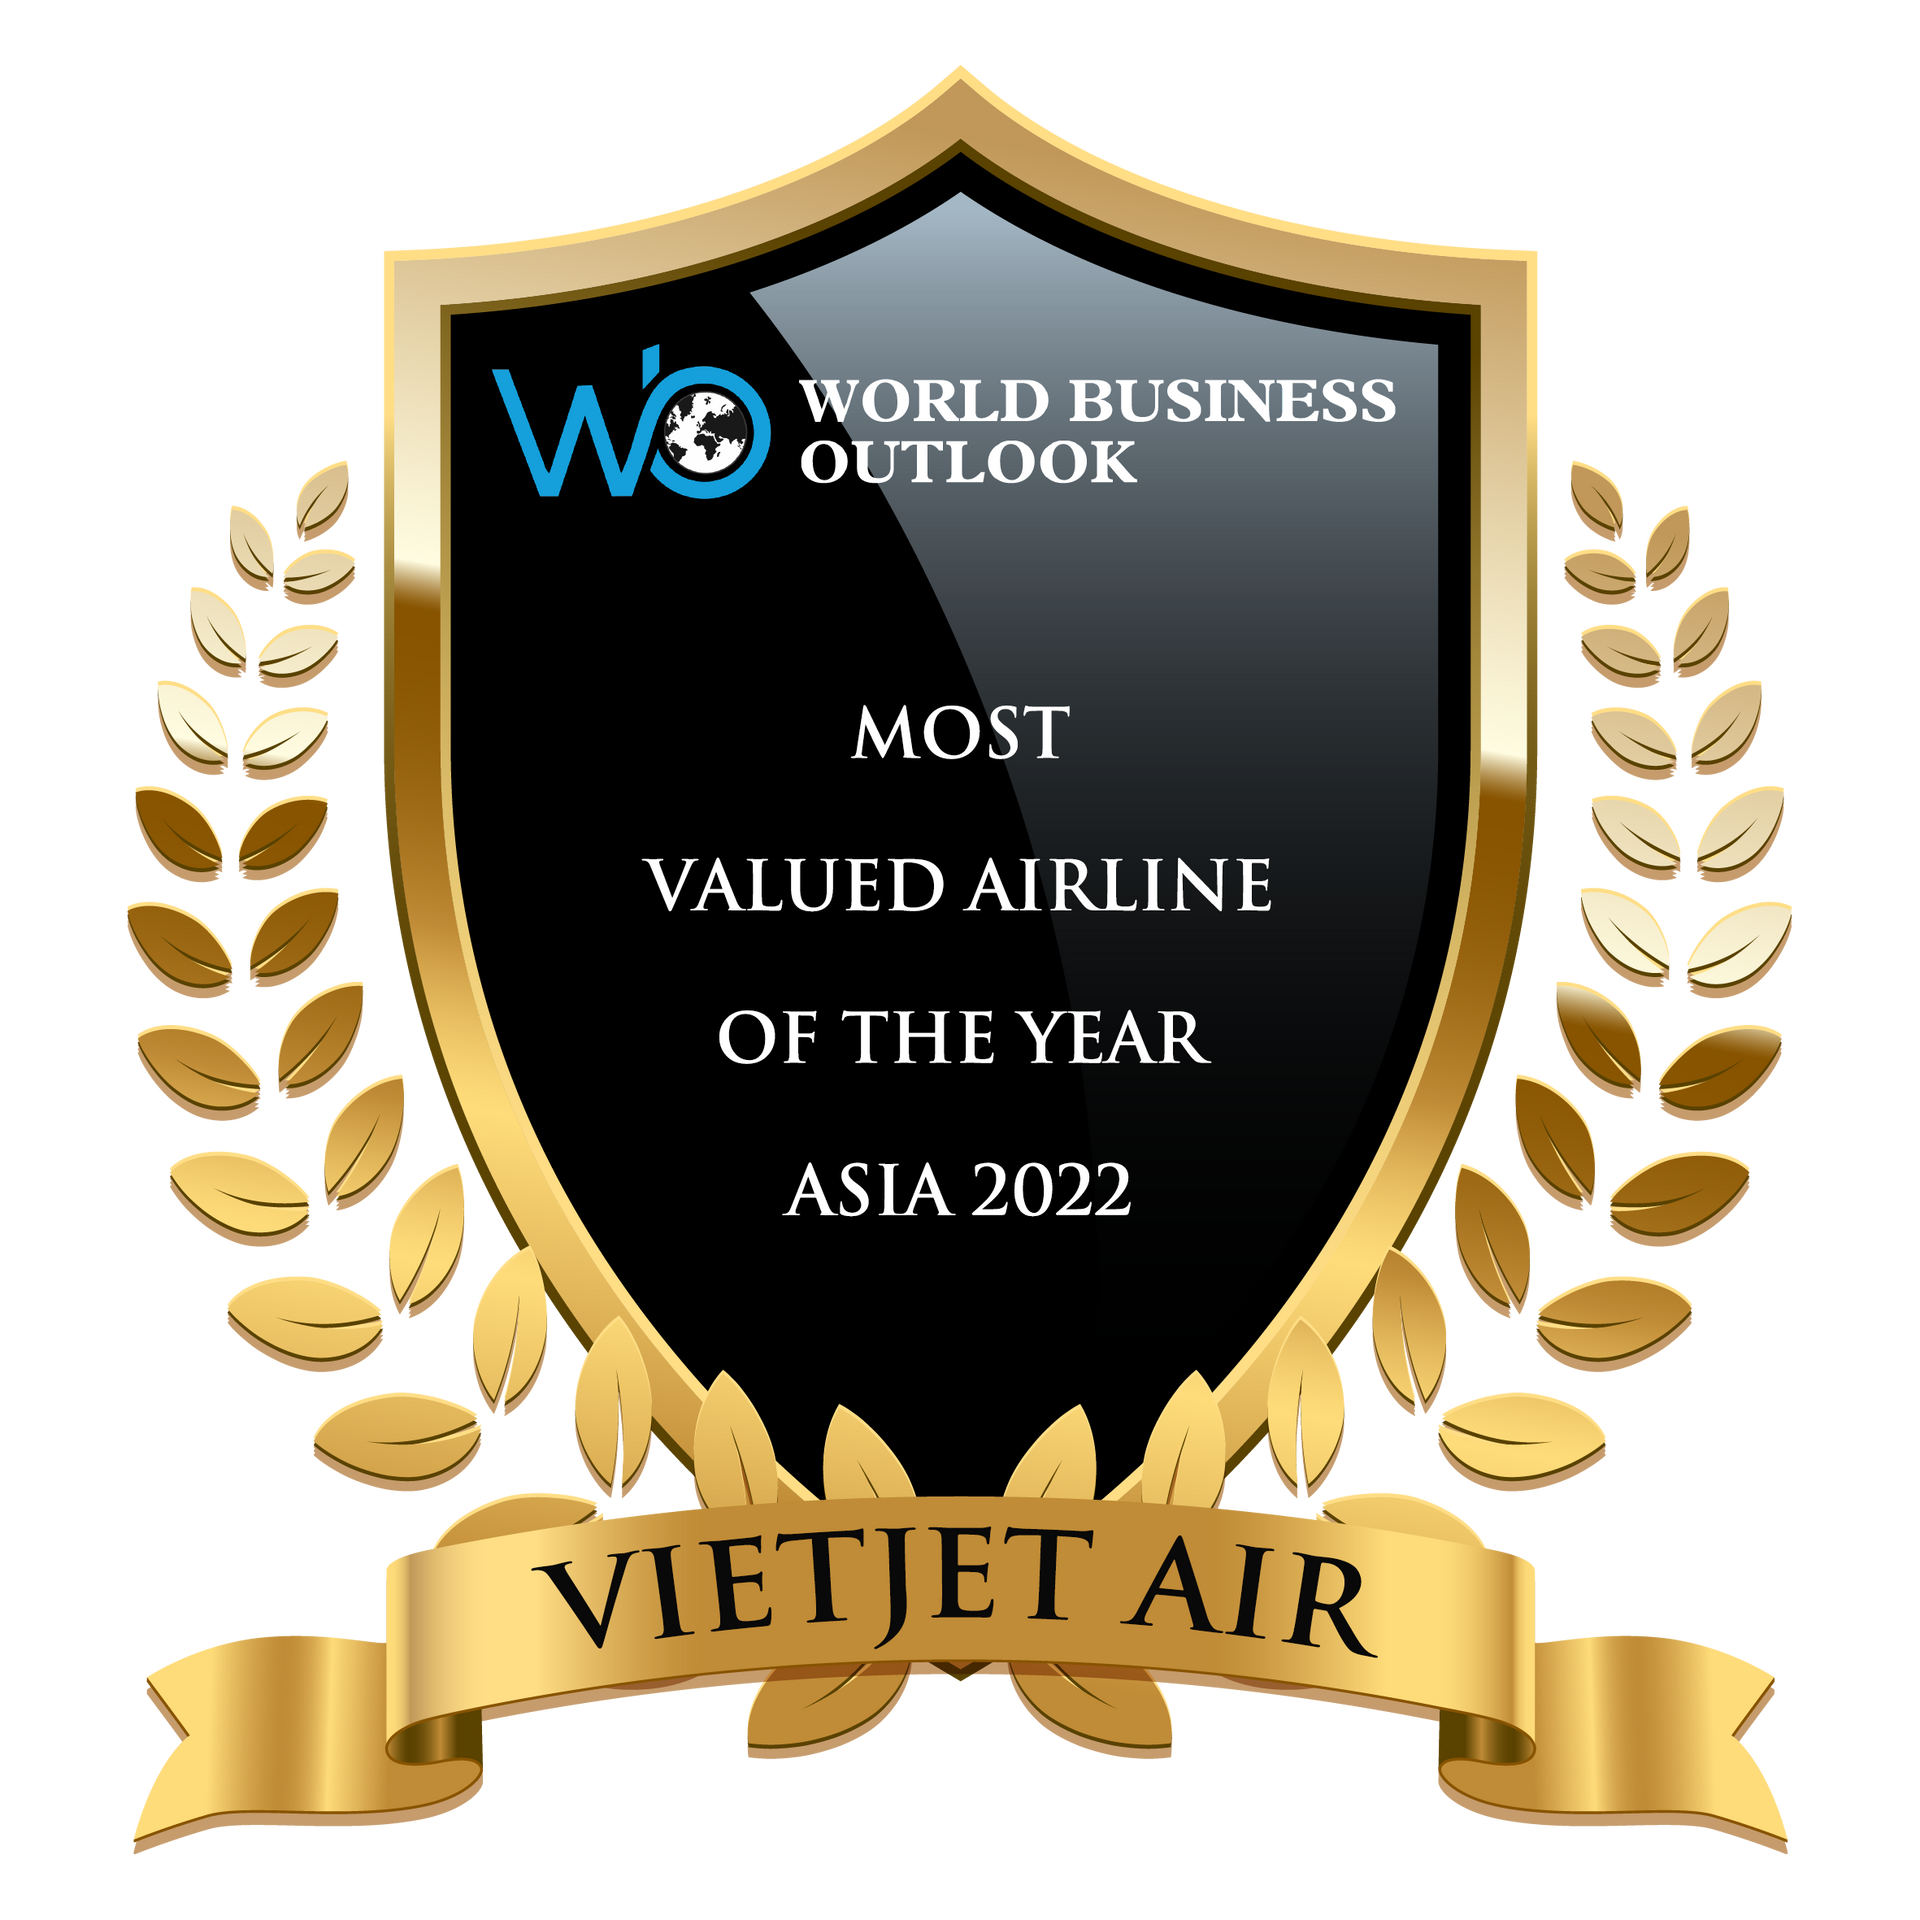 vietjet-air-most-valued-airline-asia-2022.png